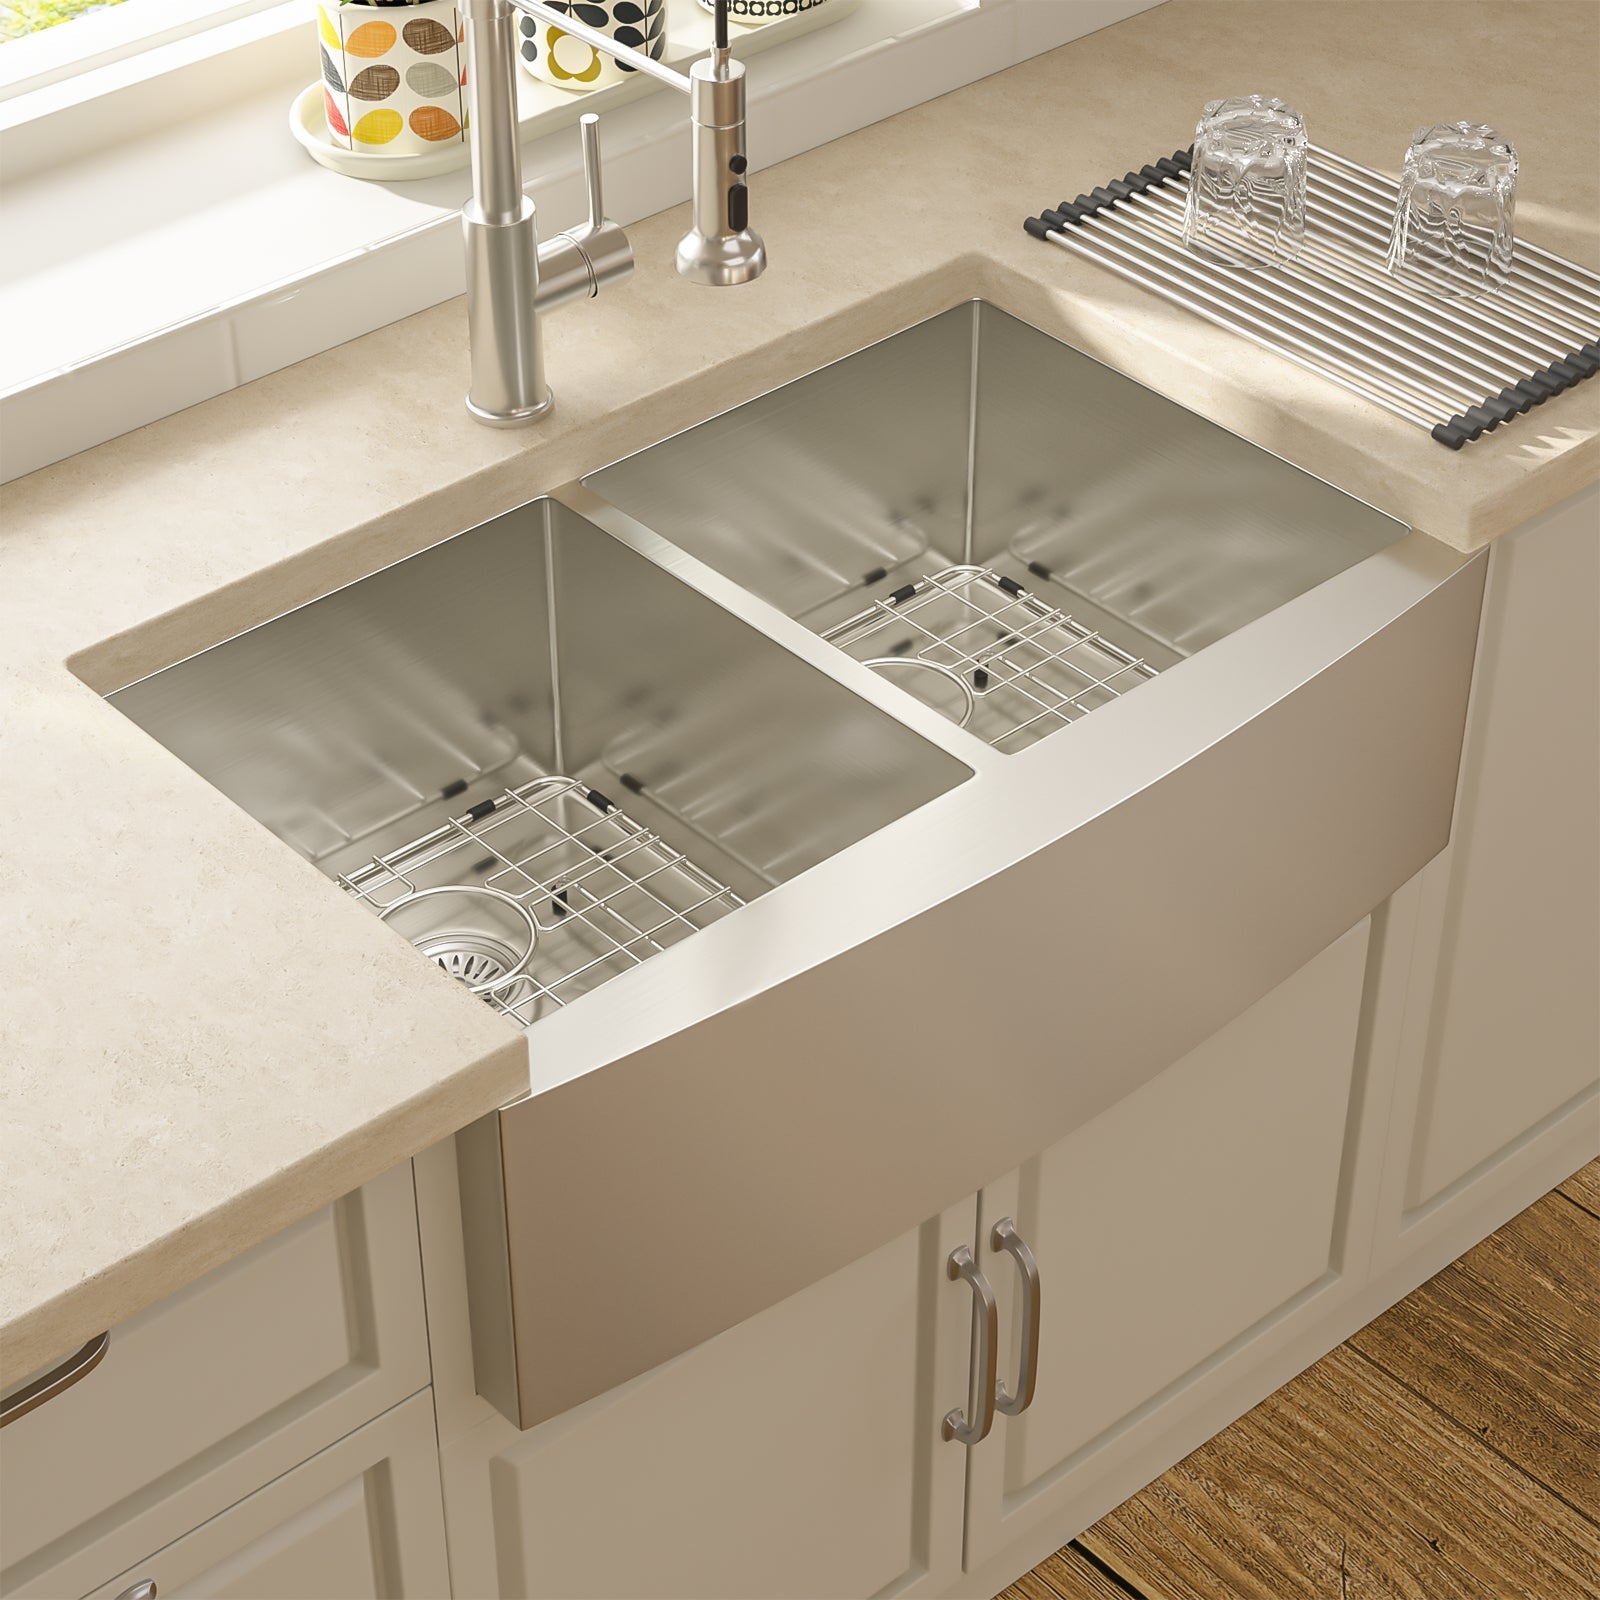 33 Inch Farmhouse Kitchen Sink 16 Gauge Stainless Steel Kitchen Sink Double Bowl 50/50 Apron Front Sink from Lordear